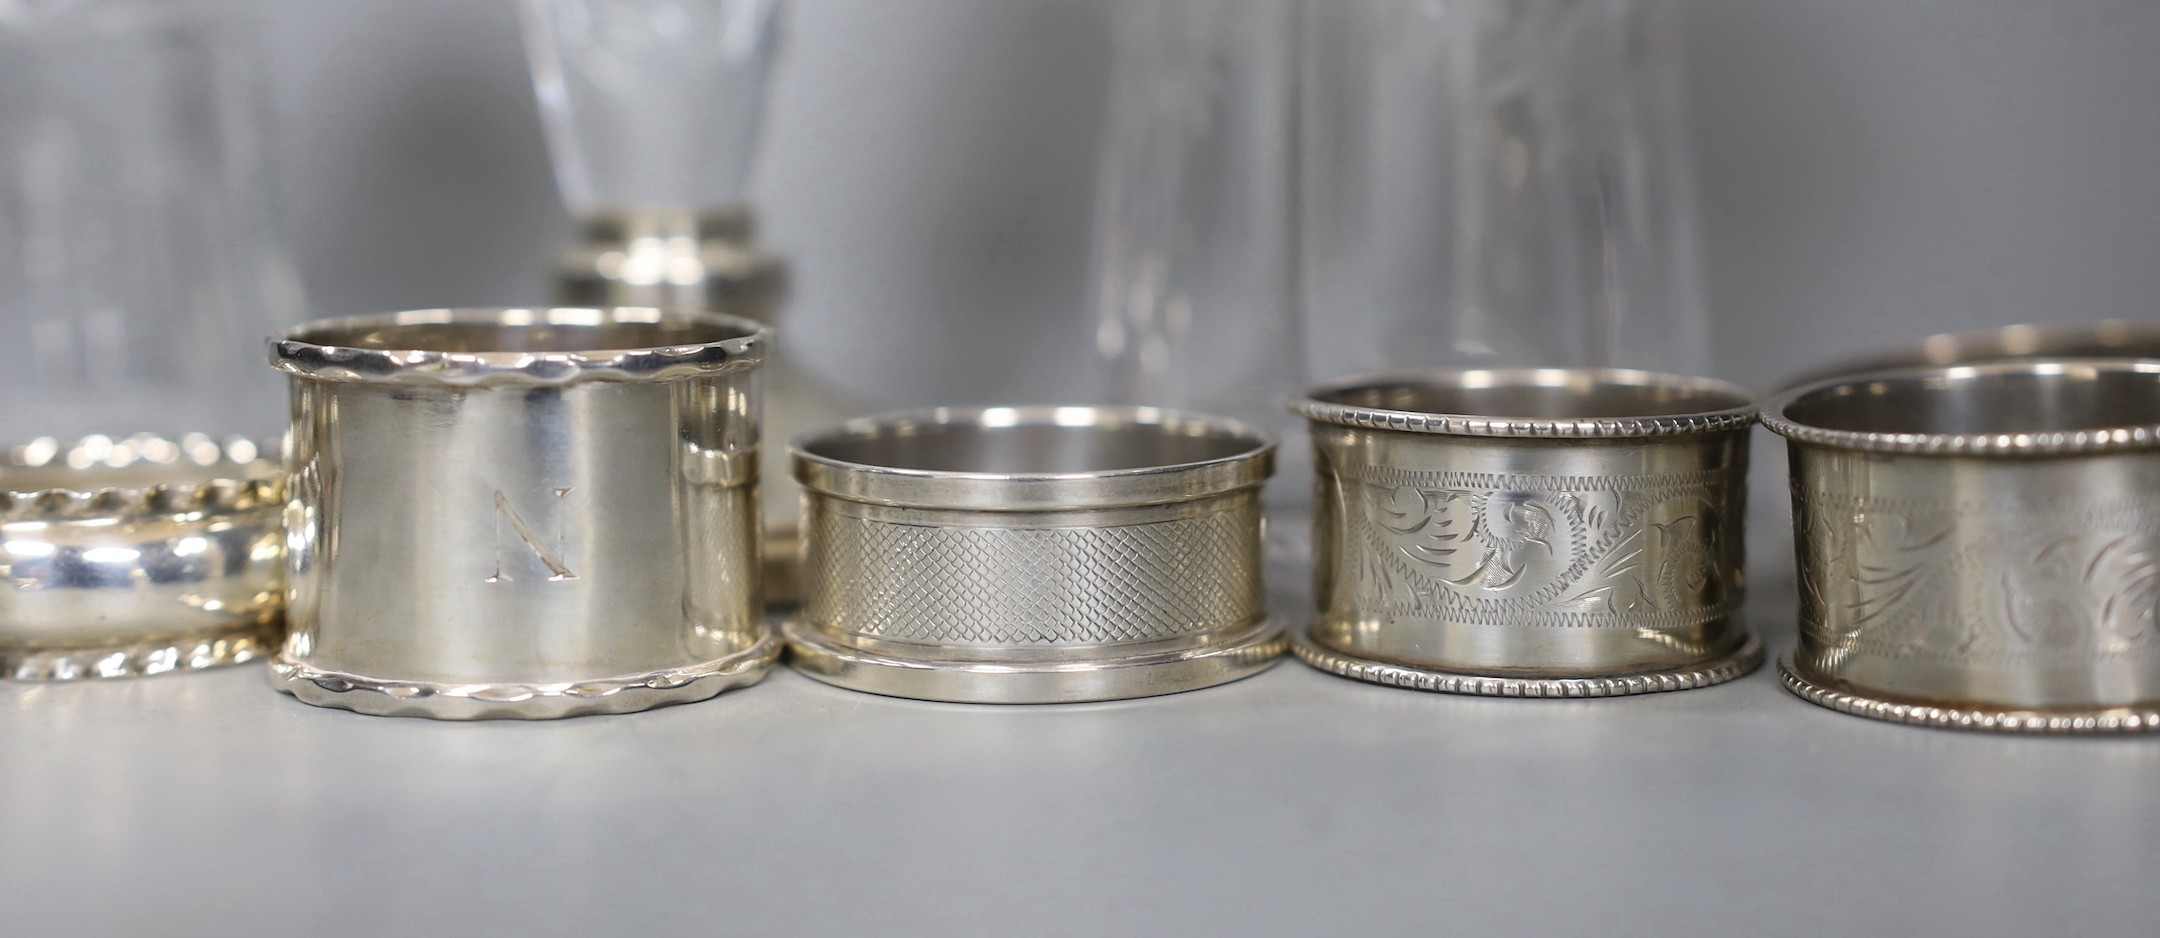 A pair of George V silver napkin rings, Birmingham, 1926, six other silver napkin rings and one stamped 'Silver', a 196's silver handled cake slice, two silver mounted glass sugar sifters and a silver mounted glass posy